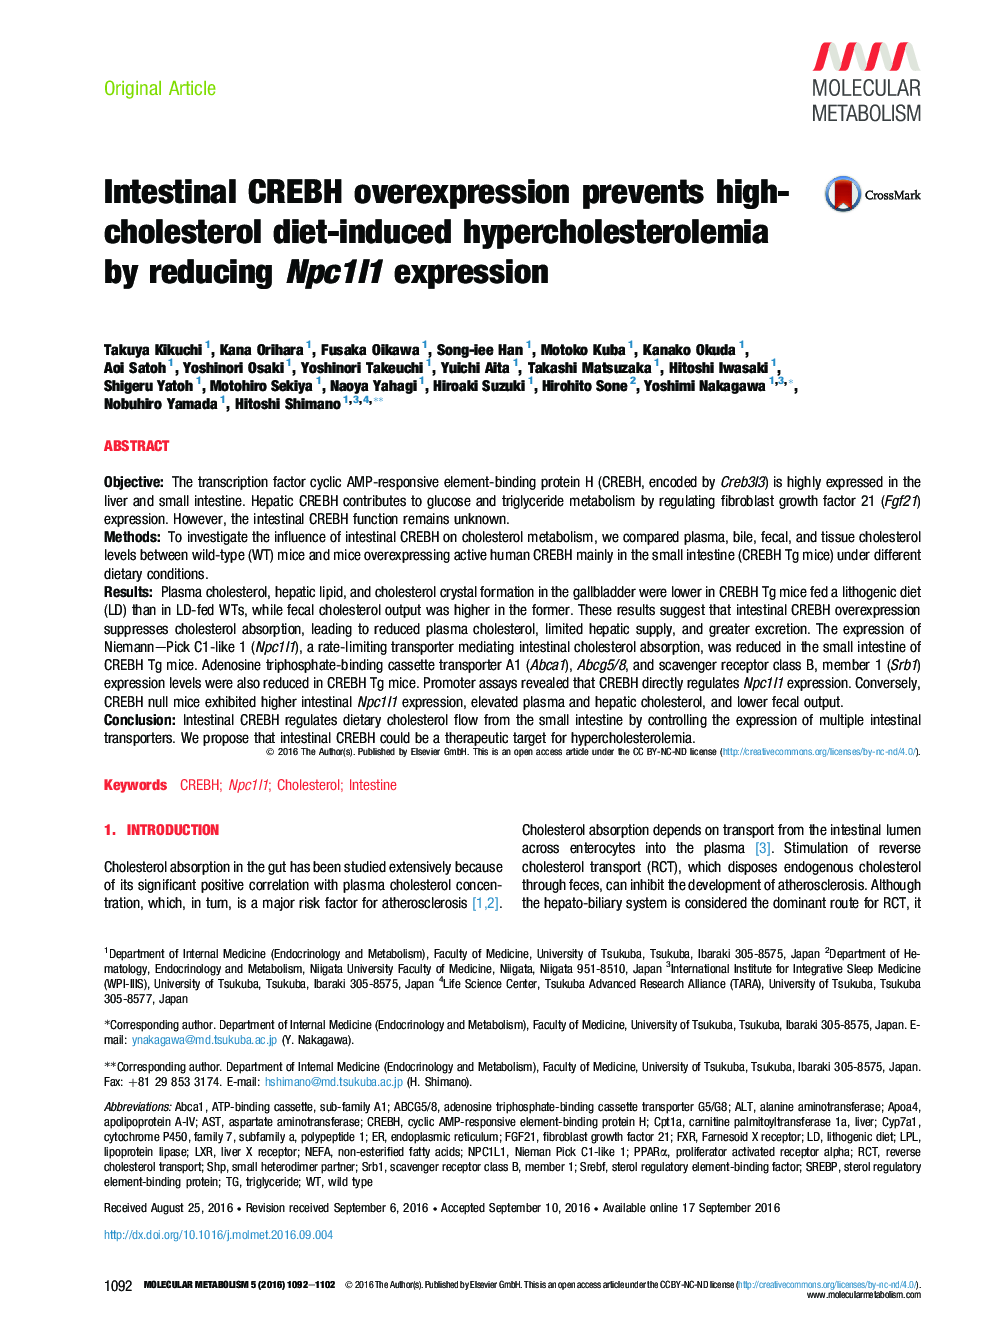 Intestinal CREBH overexpression prevents high-cholesterol diet-induced hypercholesterolemia by reducing Npc1l1 expression